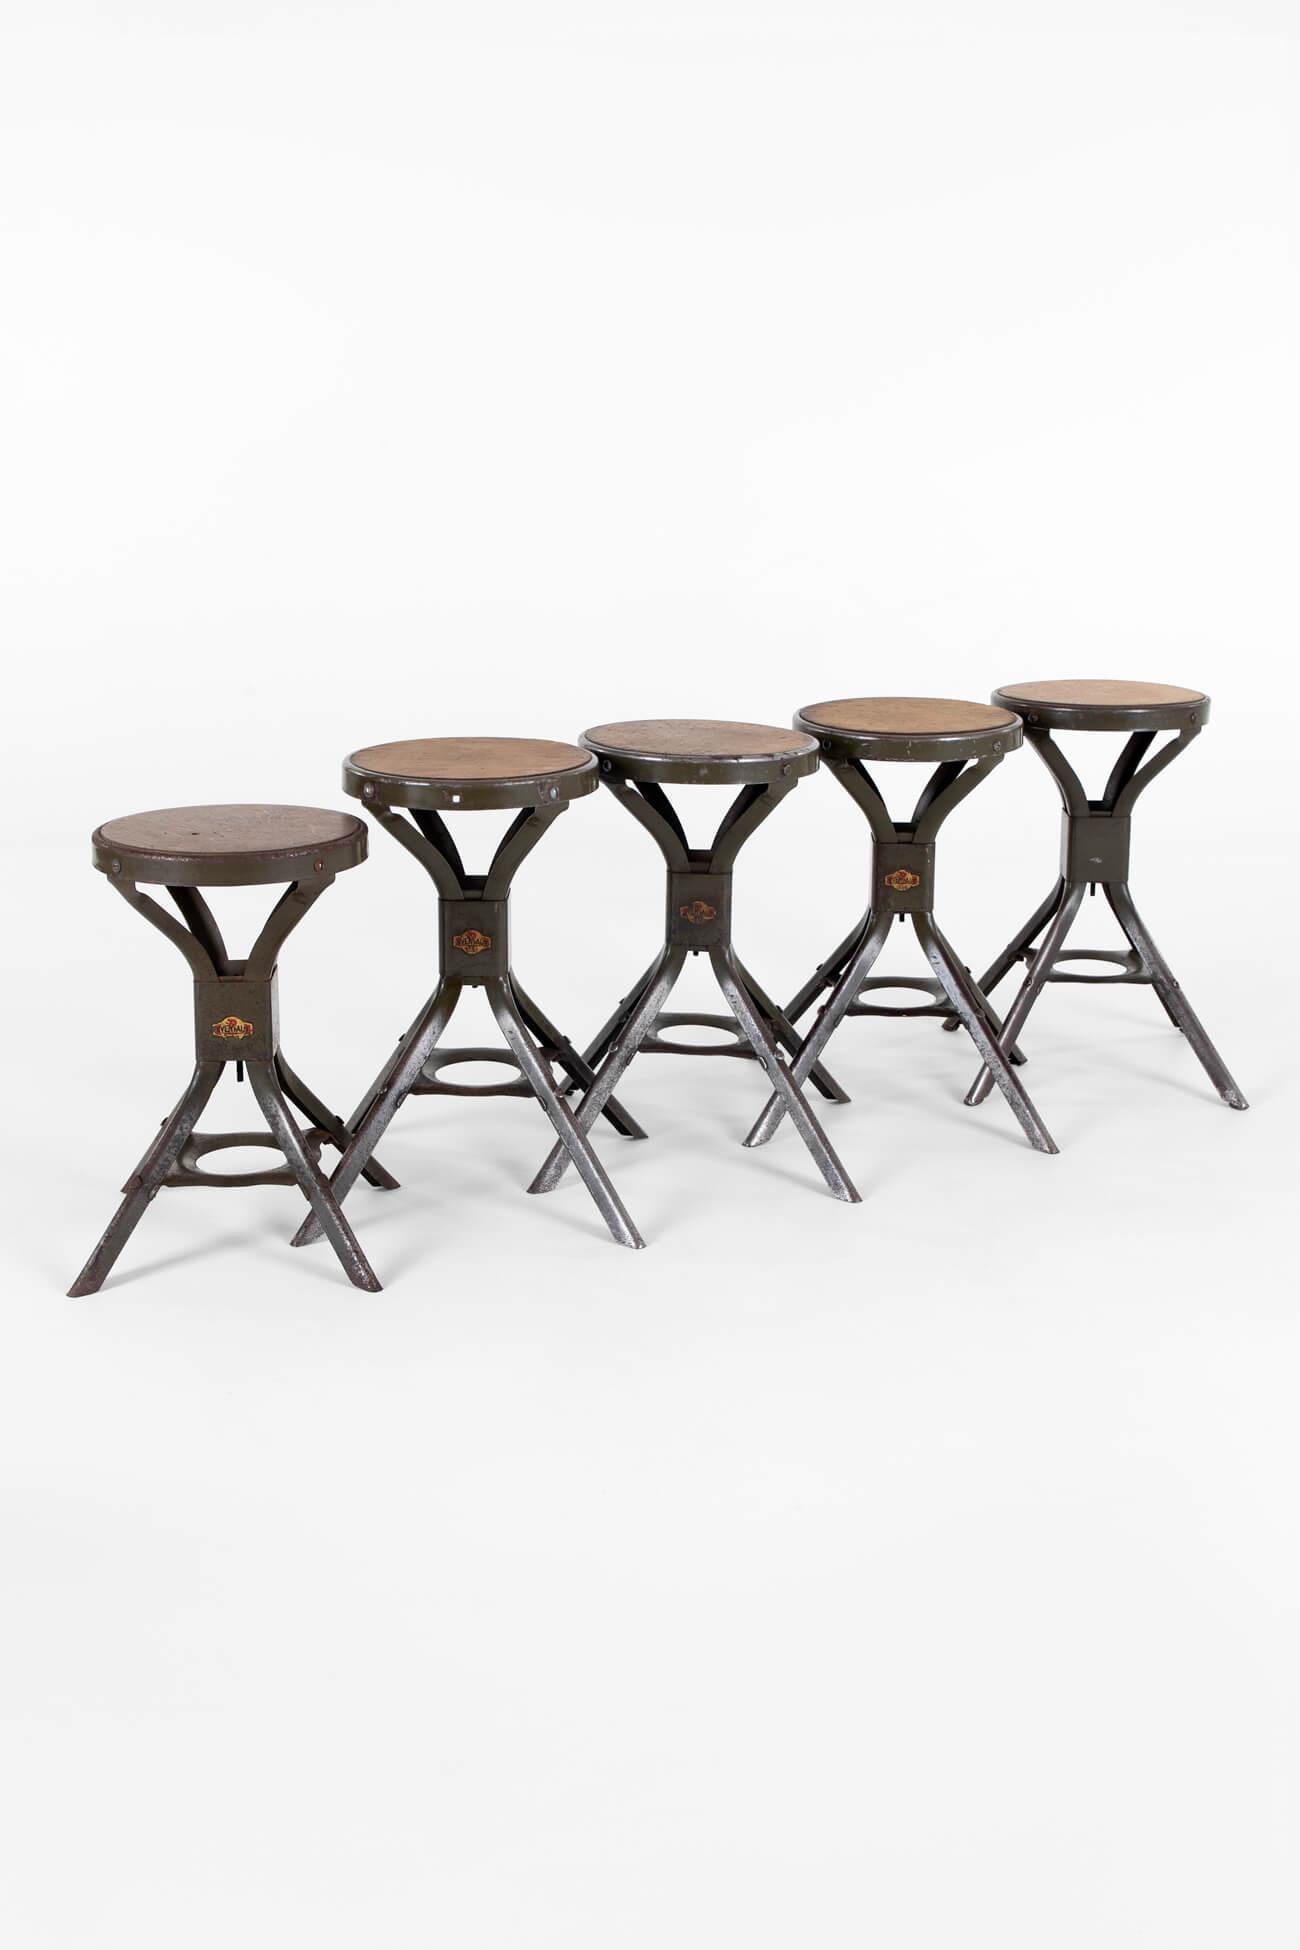 A group of eight industrial work stools by British seating company Evertaut.

These examples retain the original pitch pine seats and company badge logos at the base of the four splayed legs.

In original, strong and clean condition, ready to be